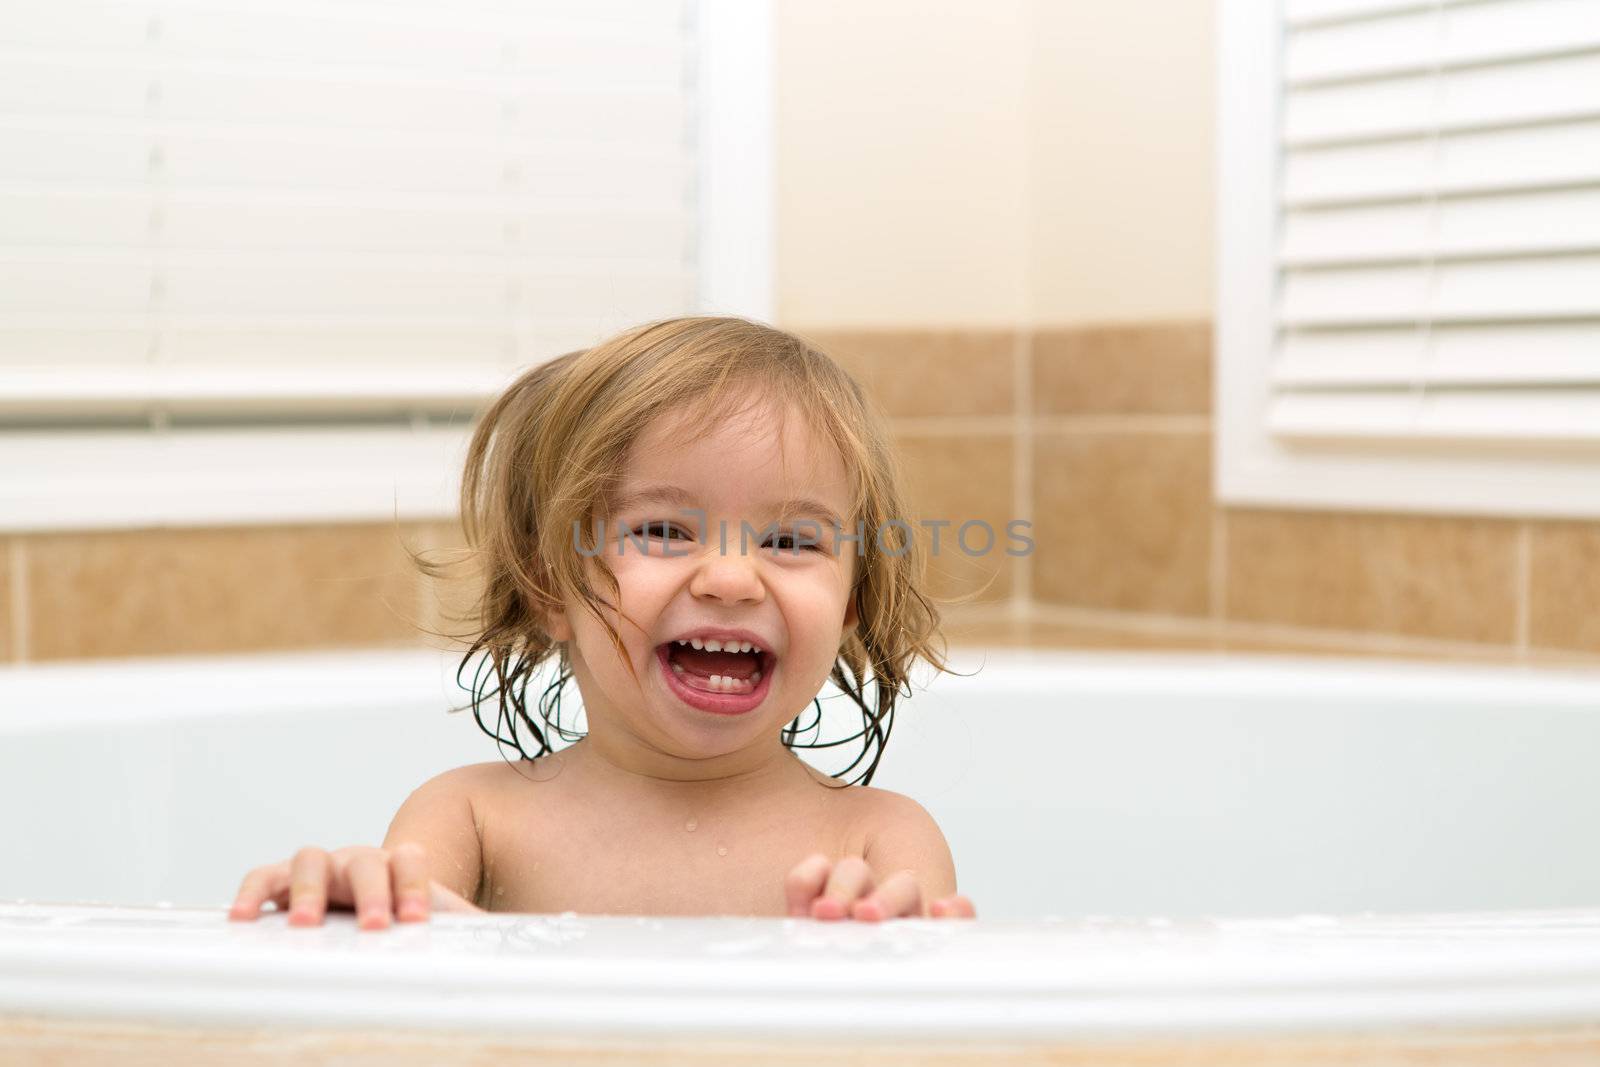 Toddler girl laughing happyly from bath tub,